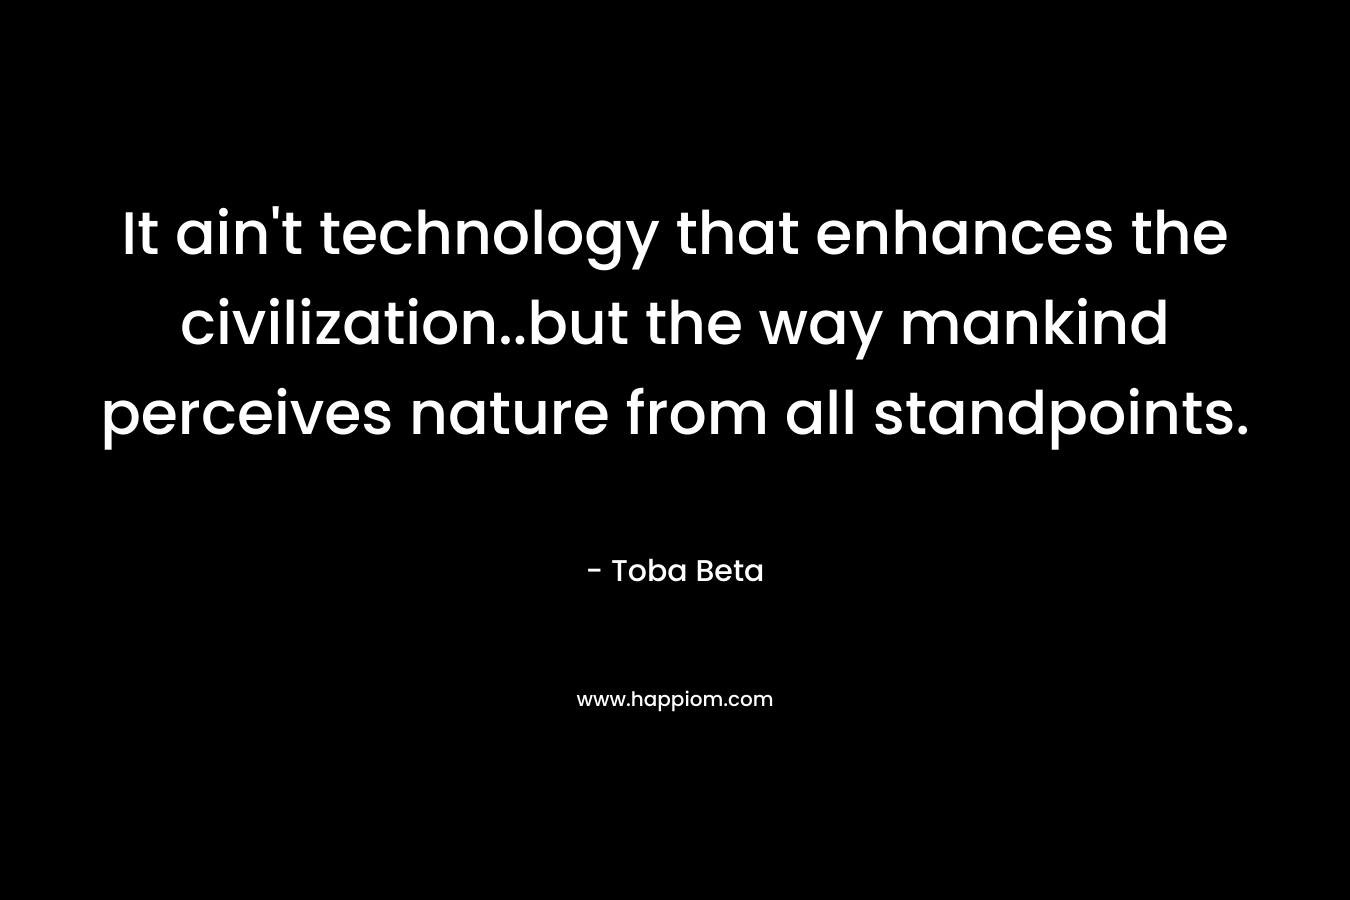 It ain’t technology that enhances the civilization..but the way mankind perceives nature from all standpoints. – Toba Beta